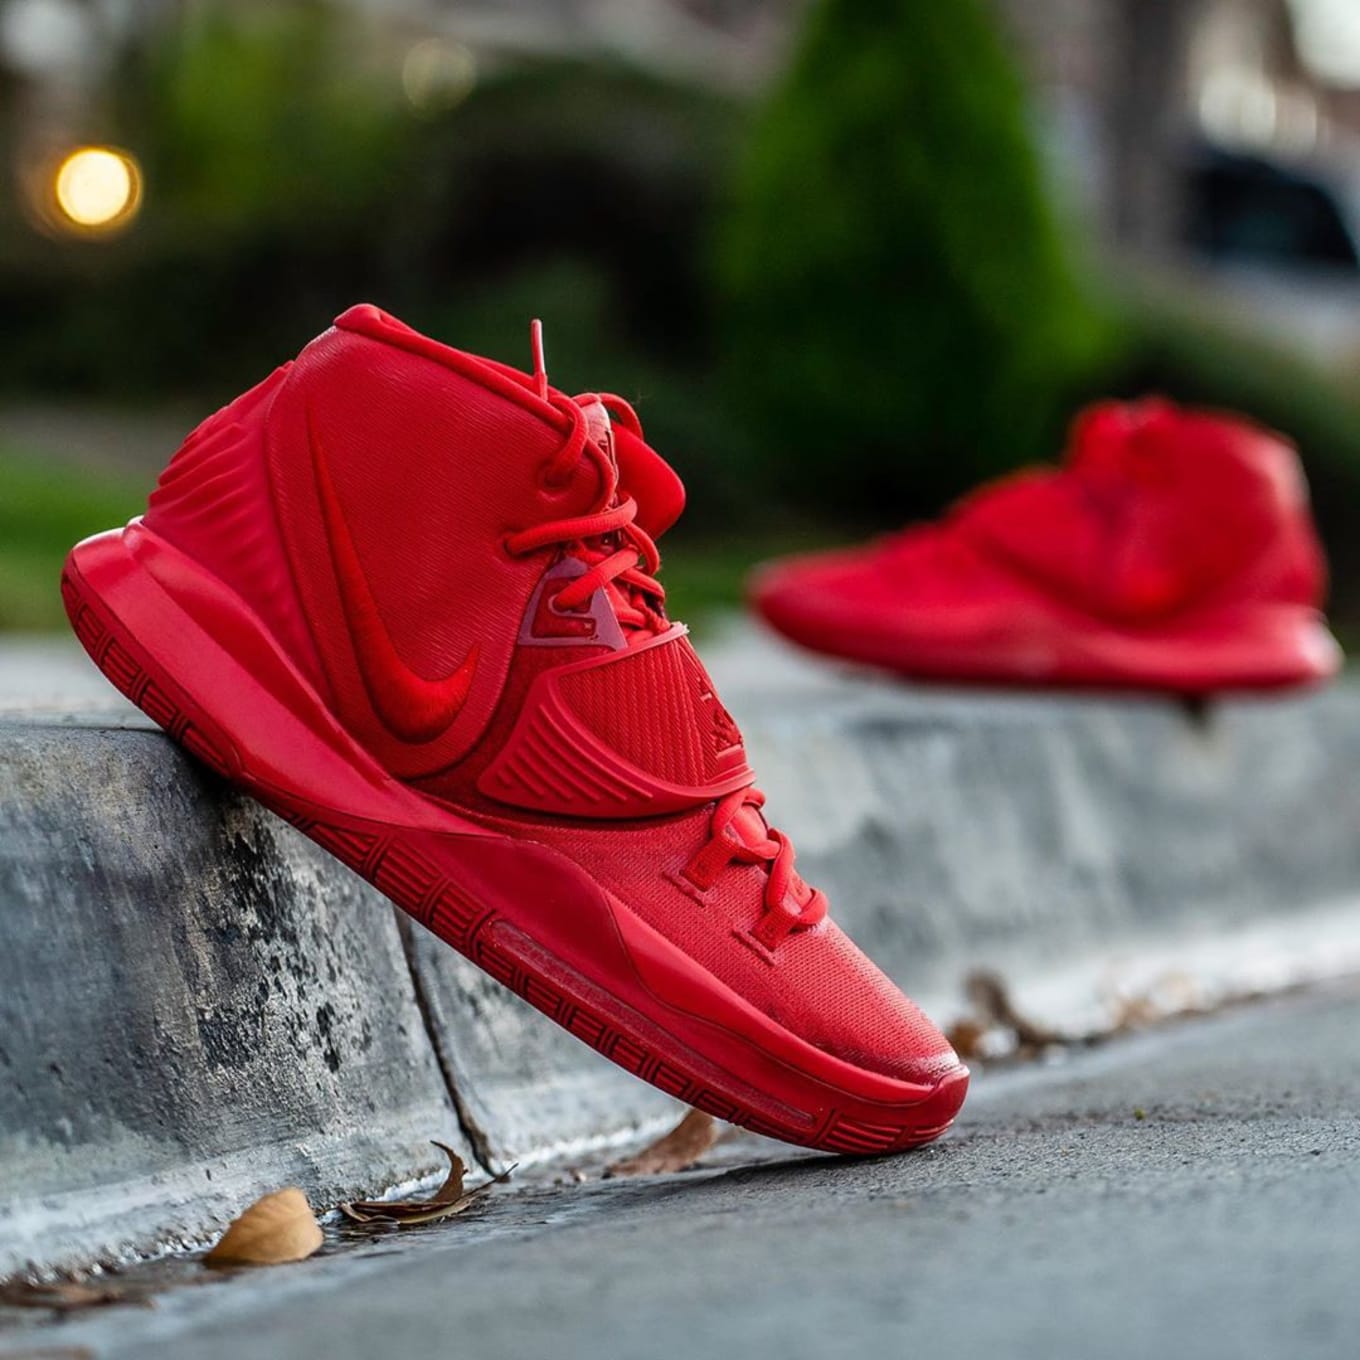 red october kyrie 6